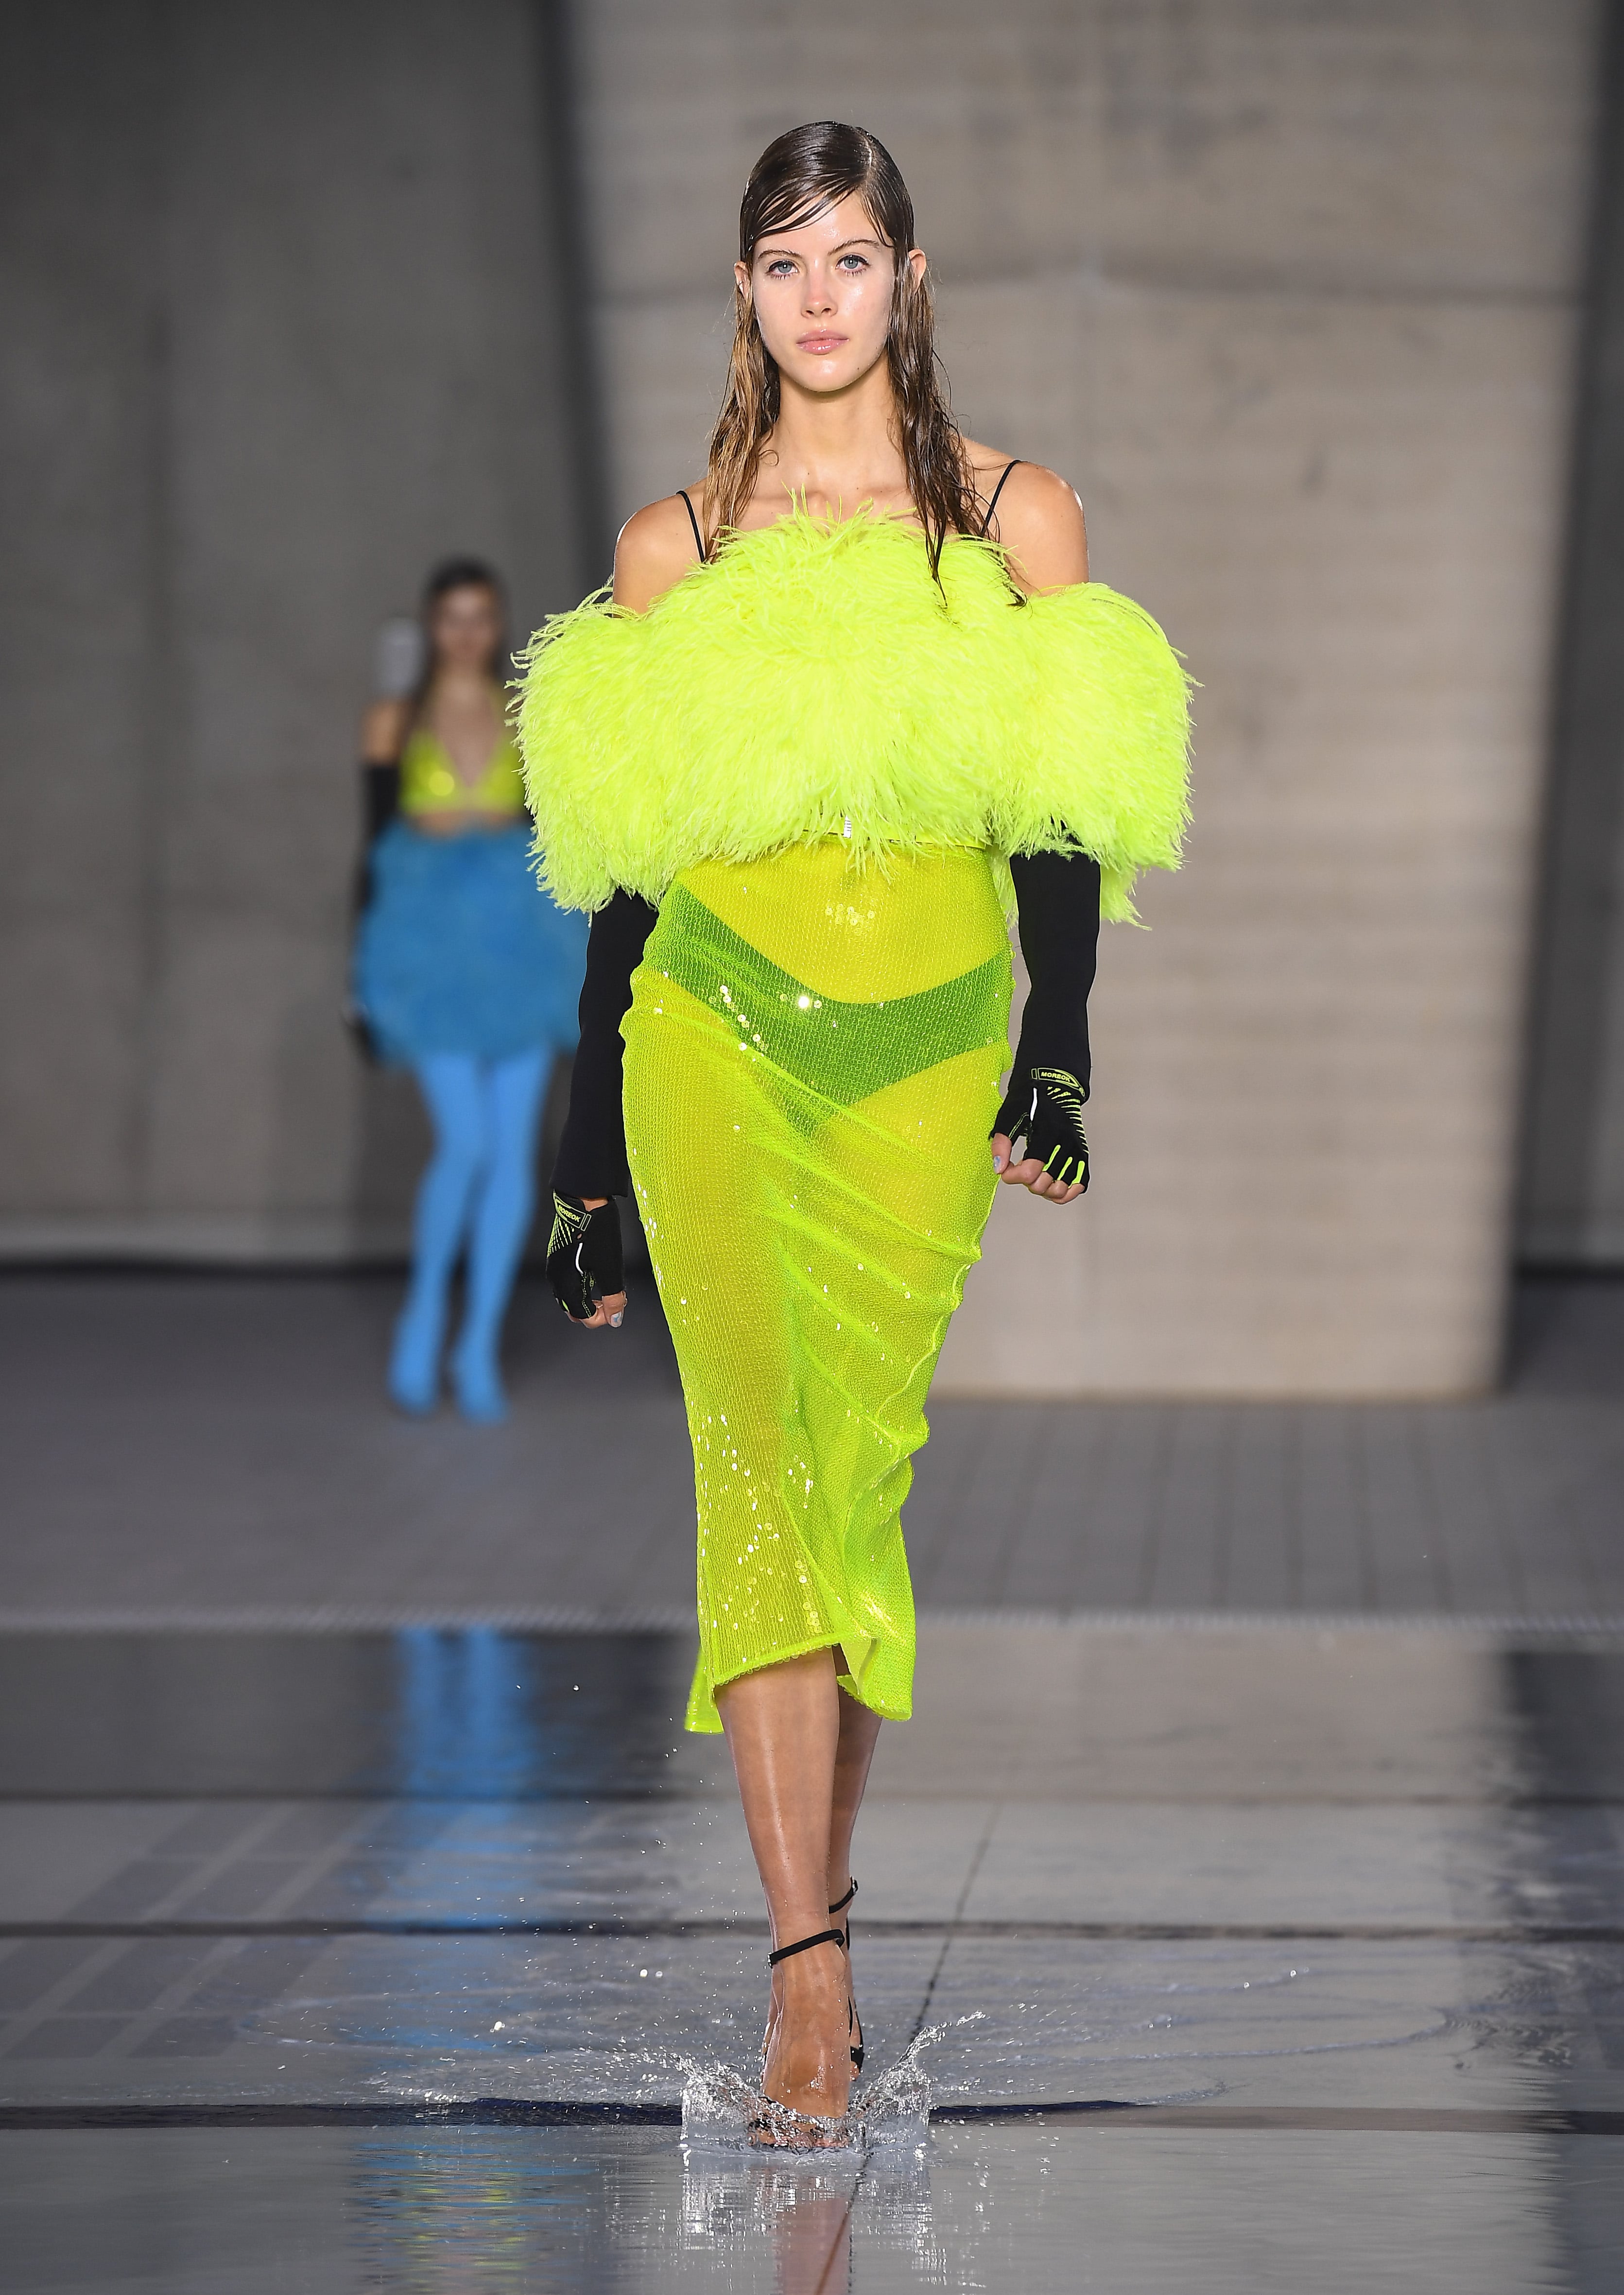 Beyoncé Brightens Up the 2022 Oscars Audience in Neon Yellow Gown